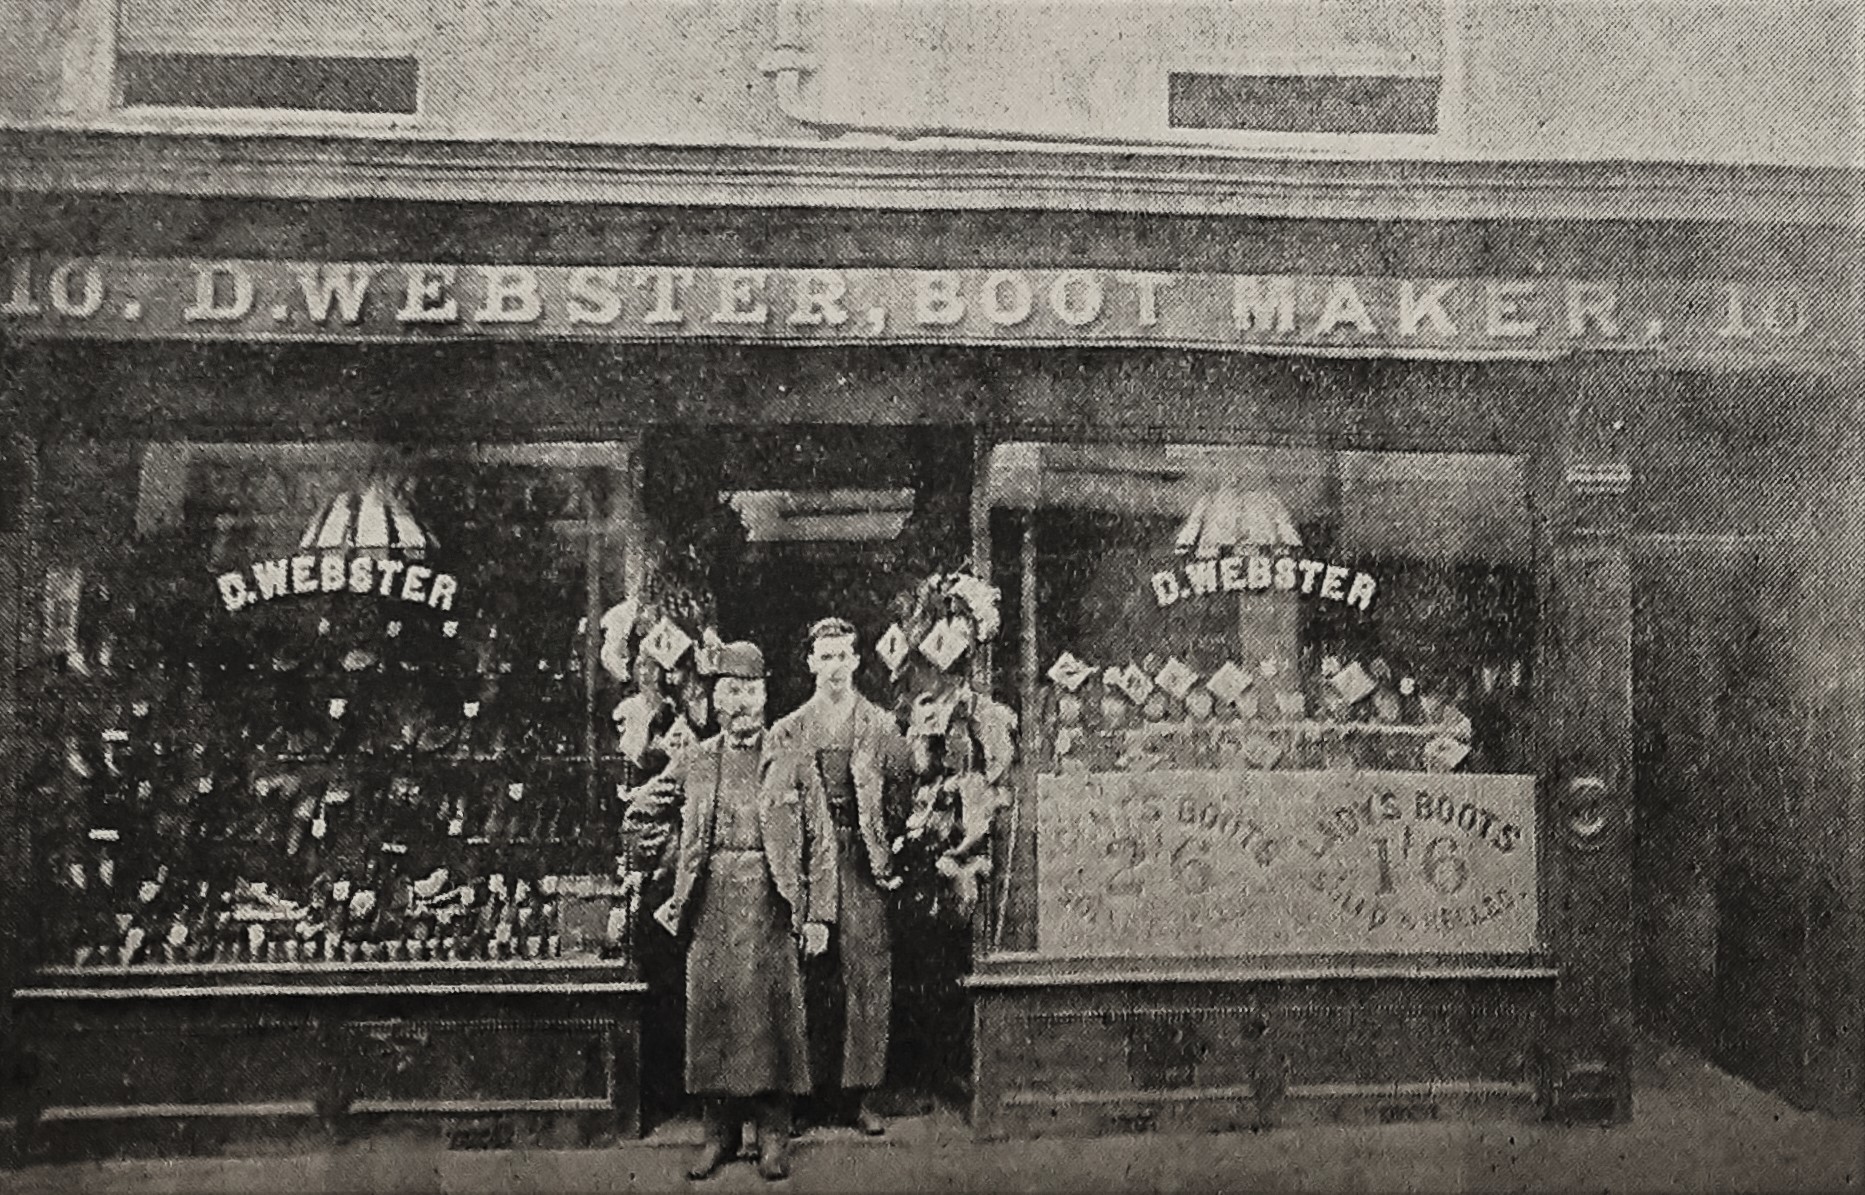 The shop as it looked in the 1890s, with Mr Darley Webster (founder) in a bowler and W R Webster, in their working rig at the entrance.